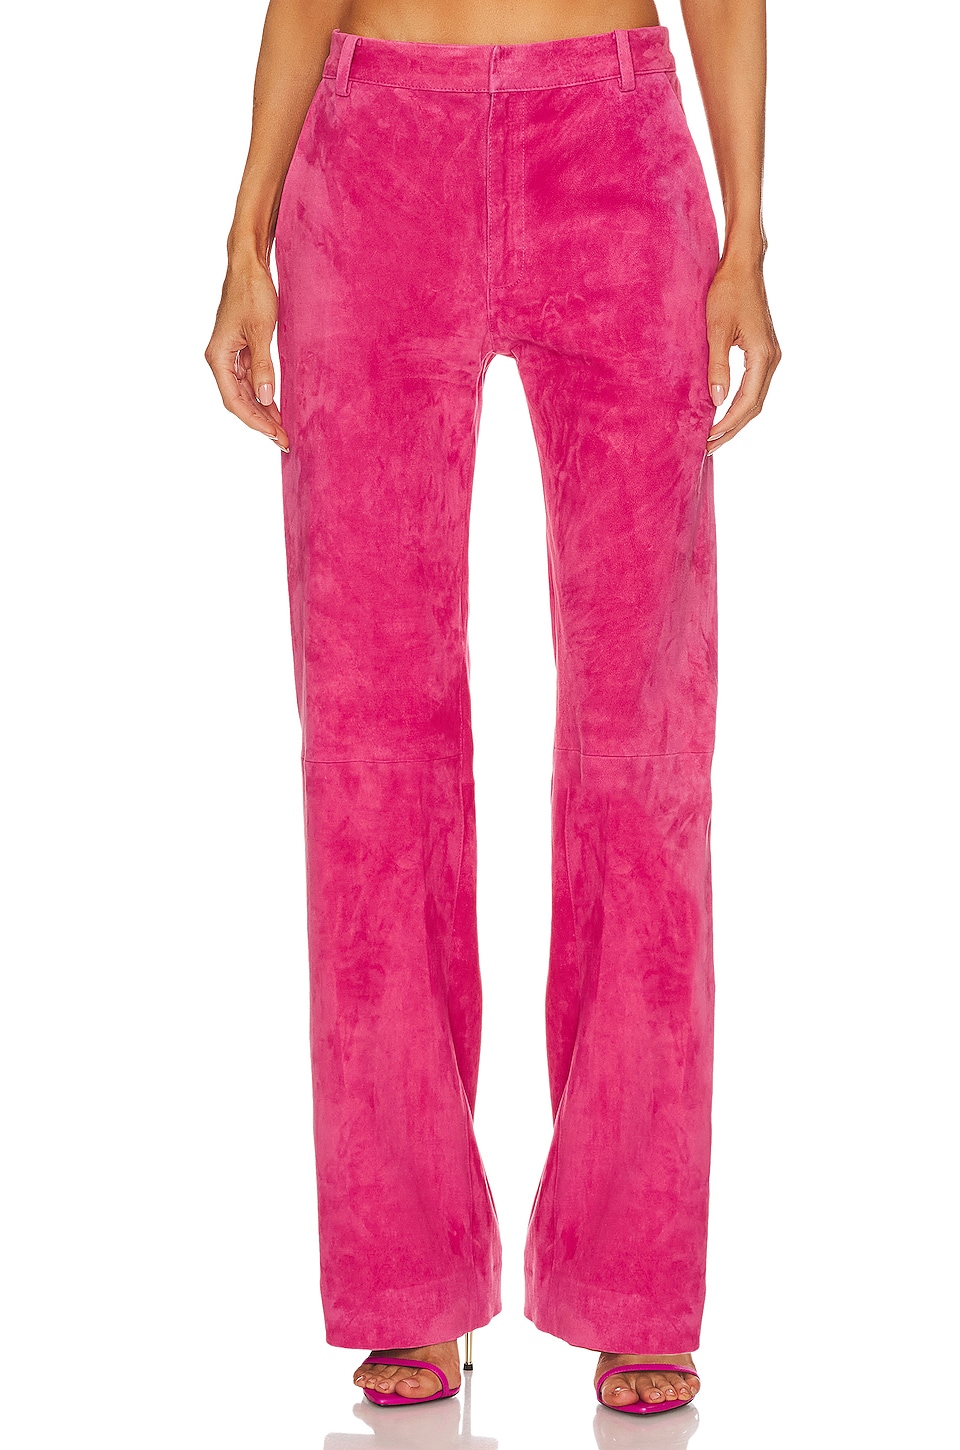 Брюки SPRWMN Baggy Low Rise Suede Trousers, цвет Hot Pink брюки river island petite baggy low rise parachute белый